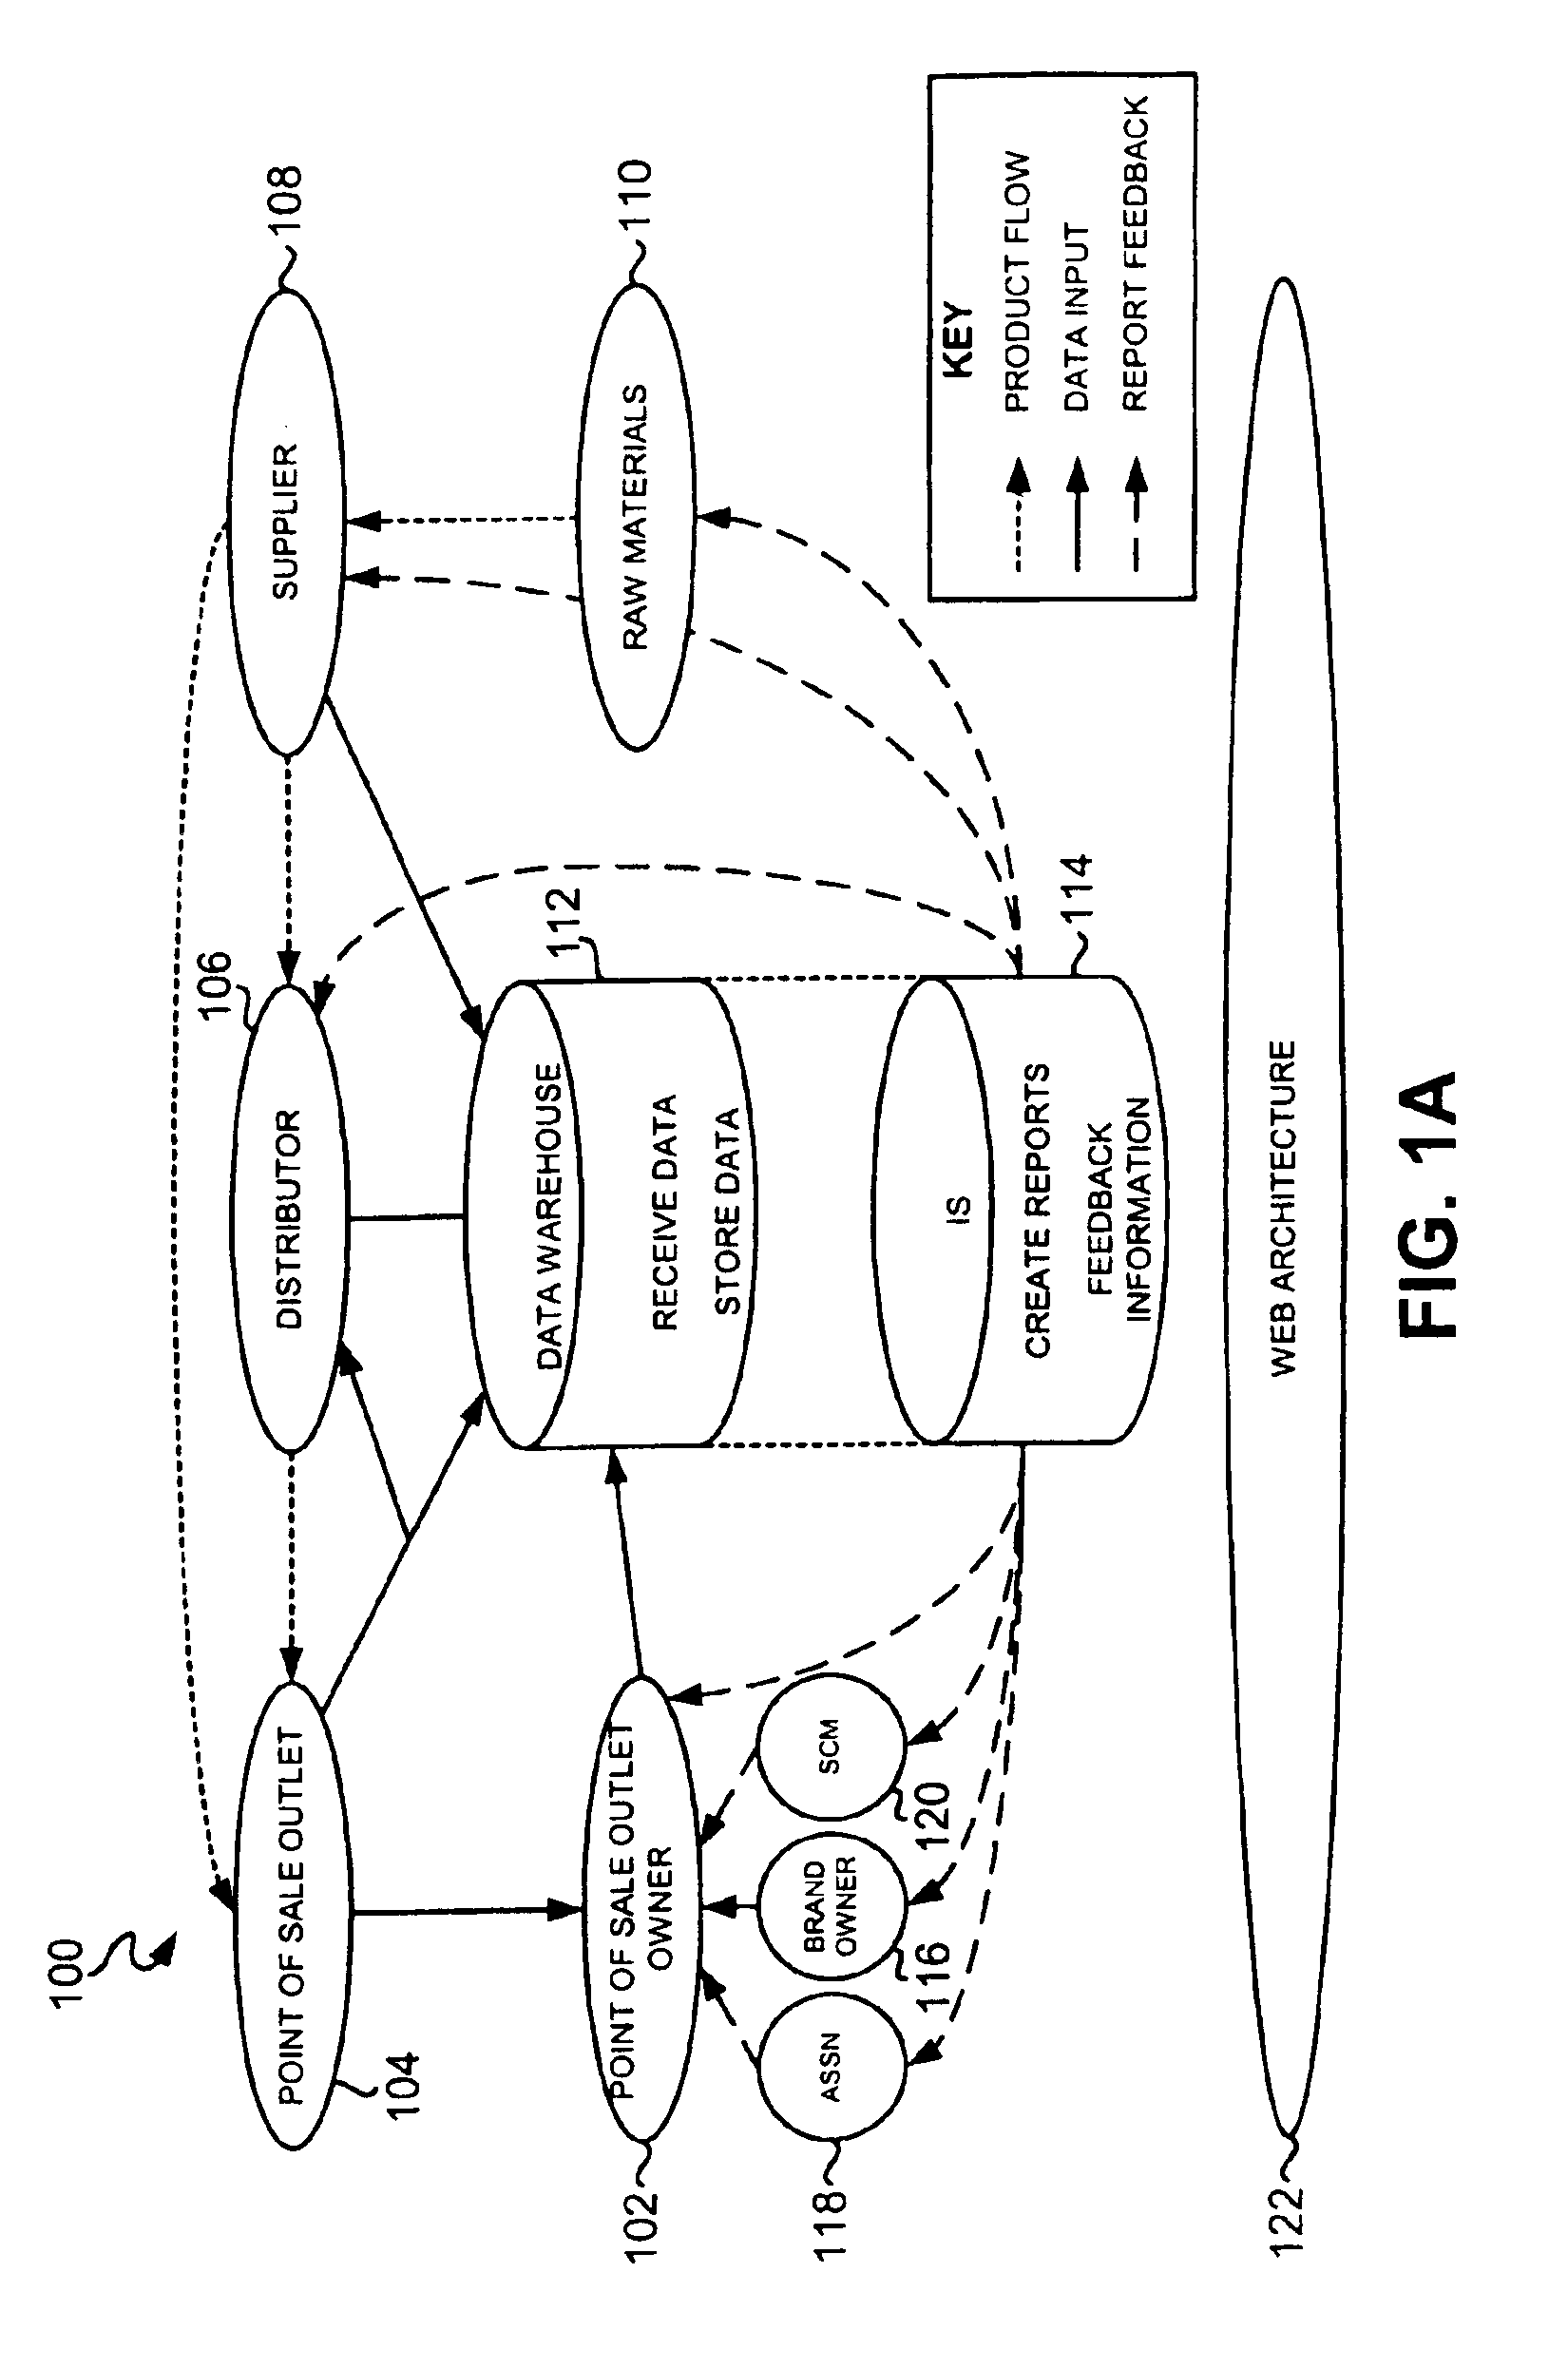 System, method and computer program product for order confirmation in a supply chain management framework